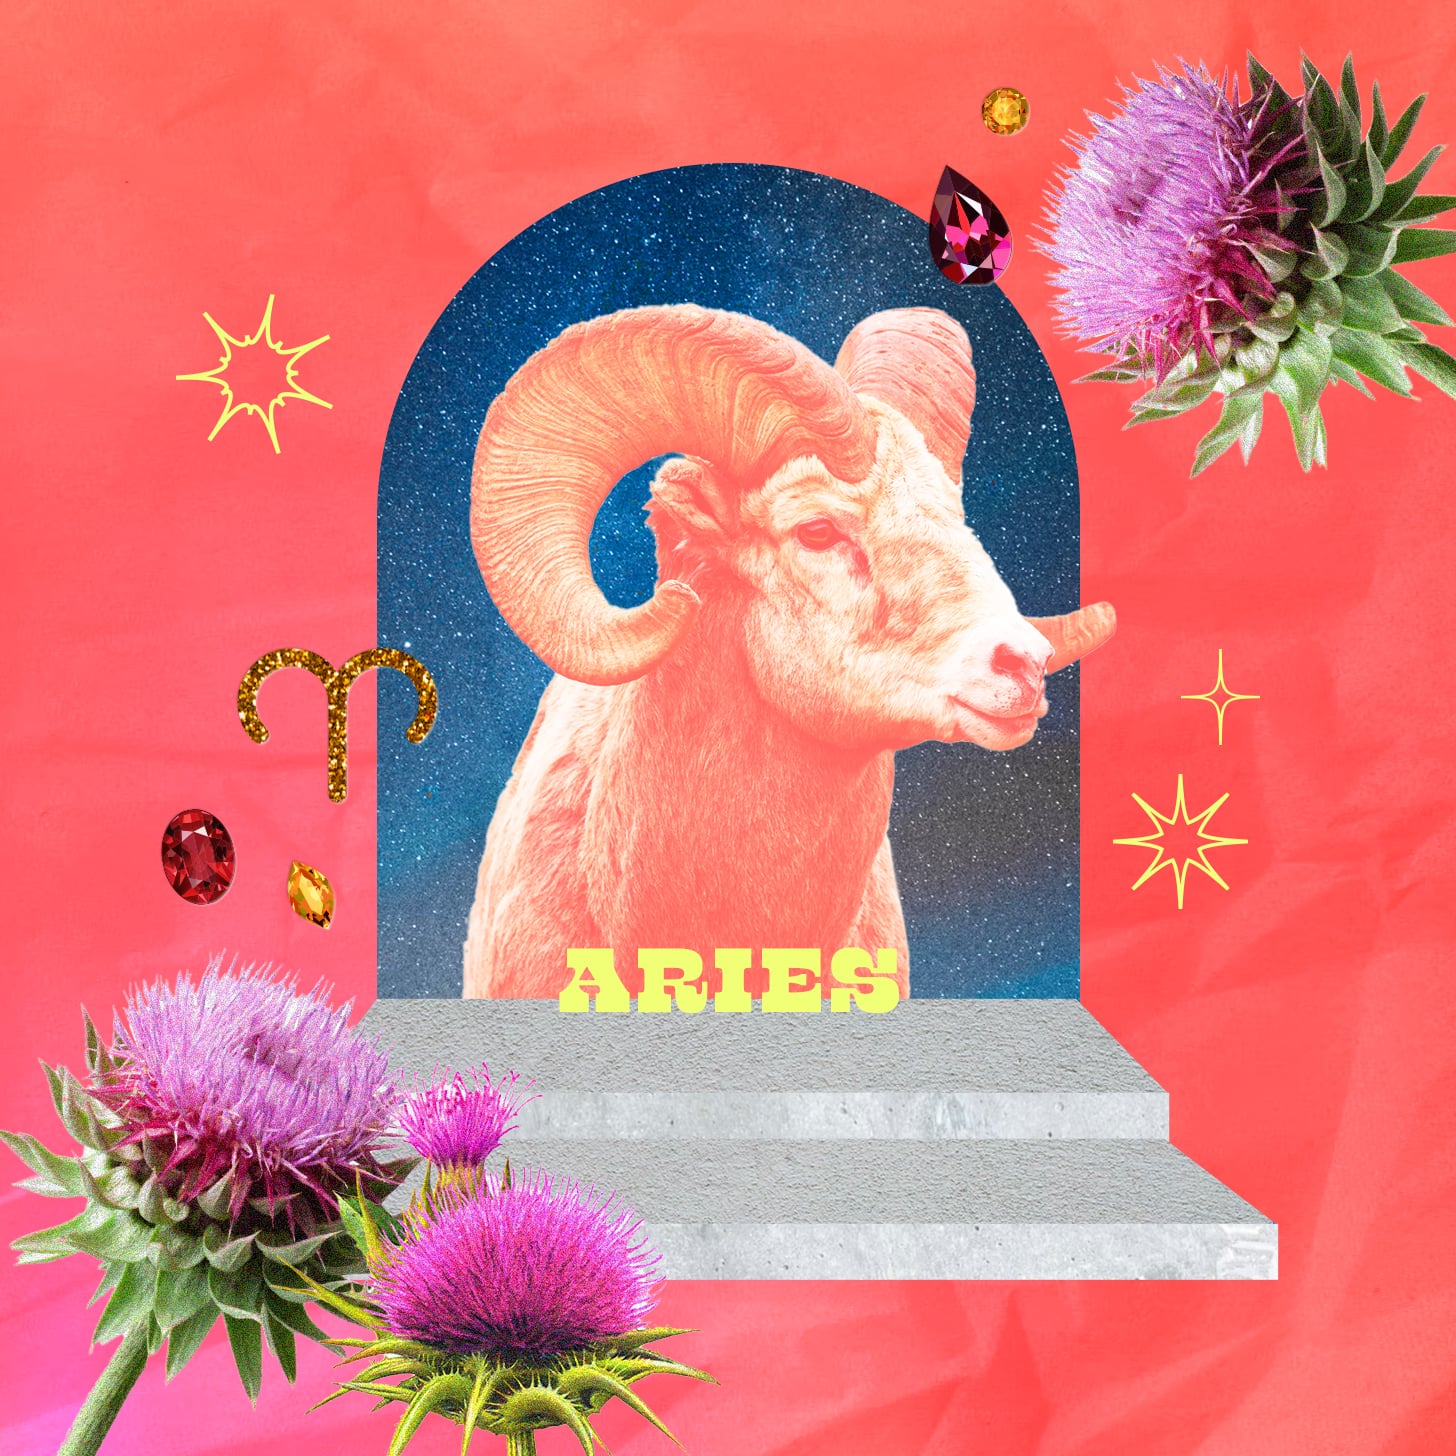 Aries weekly horoscope for July 10, 2022